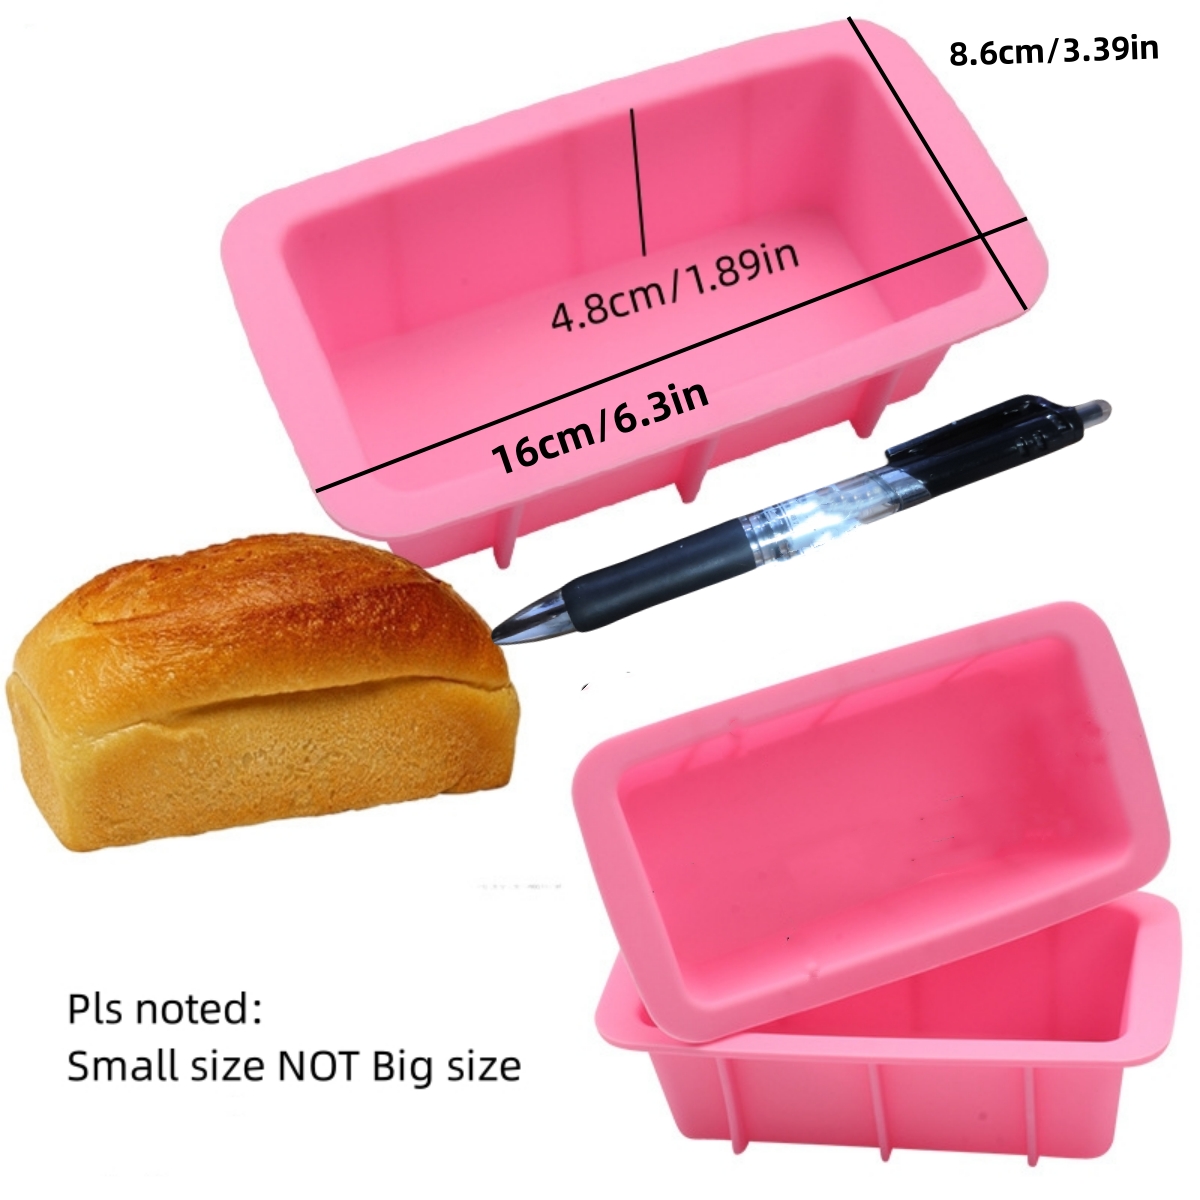 Silicone Baking Molds NonStick Rectangle Cake Pans Mini Loaf Pan